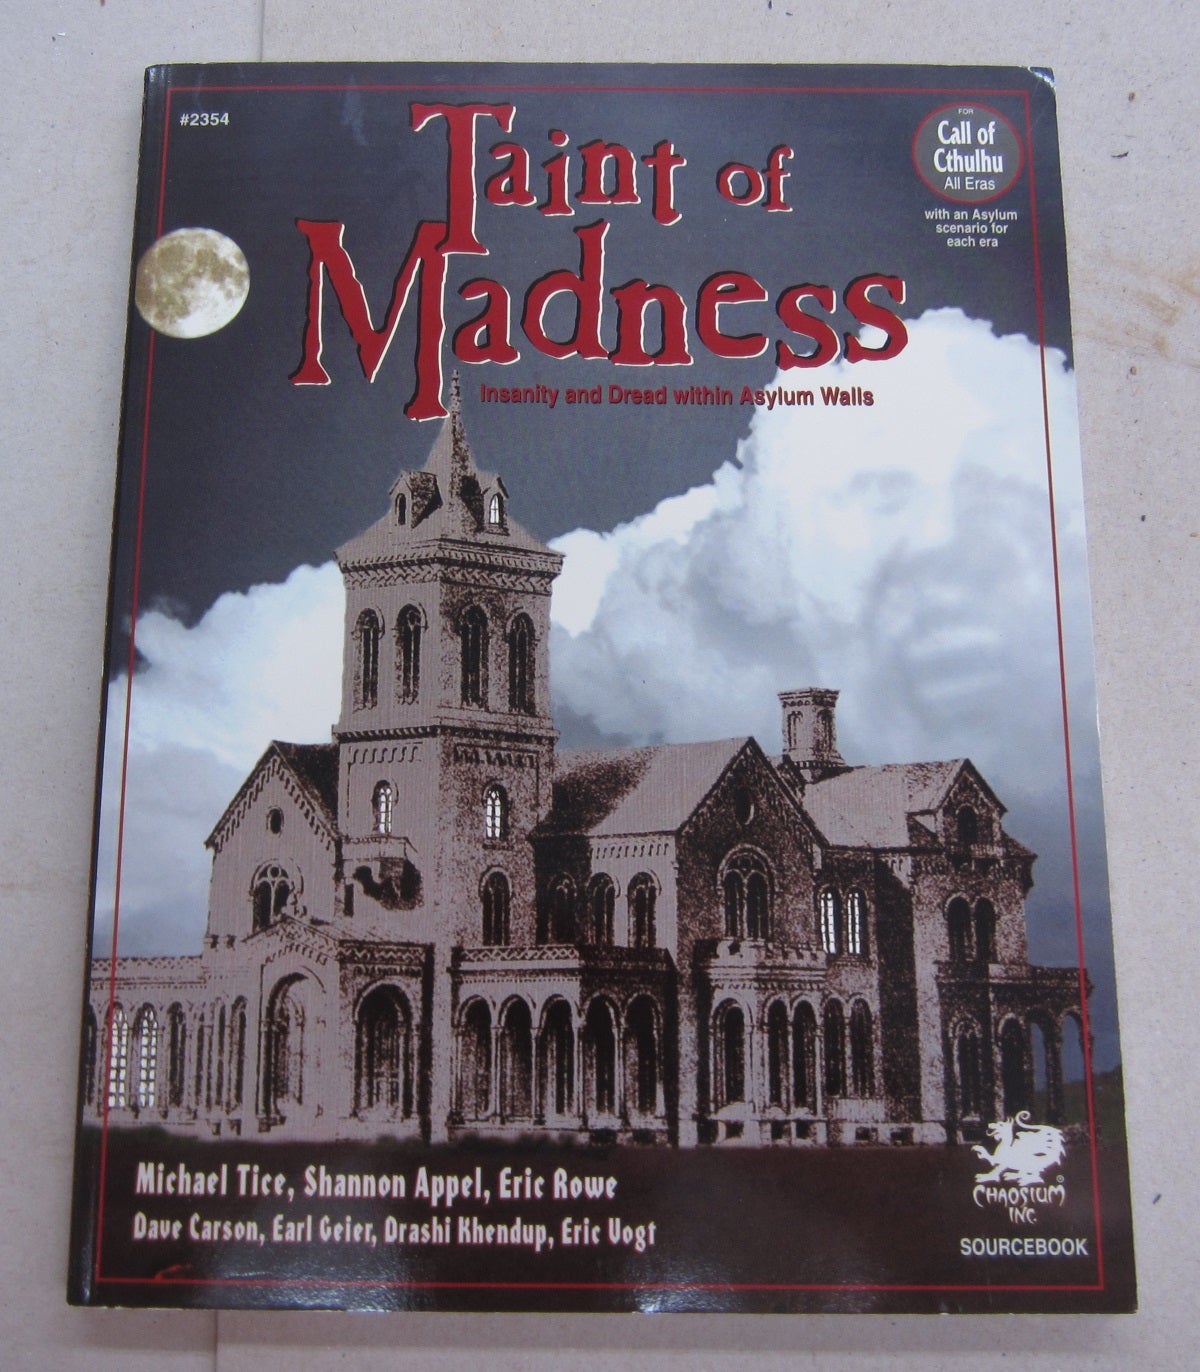 Michael Tice, Shannon Appel, Eric Rowe: Taint of Madness (Paperback, Chaosium Inc.)